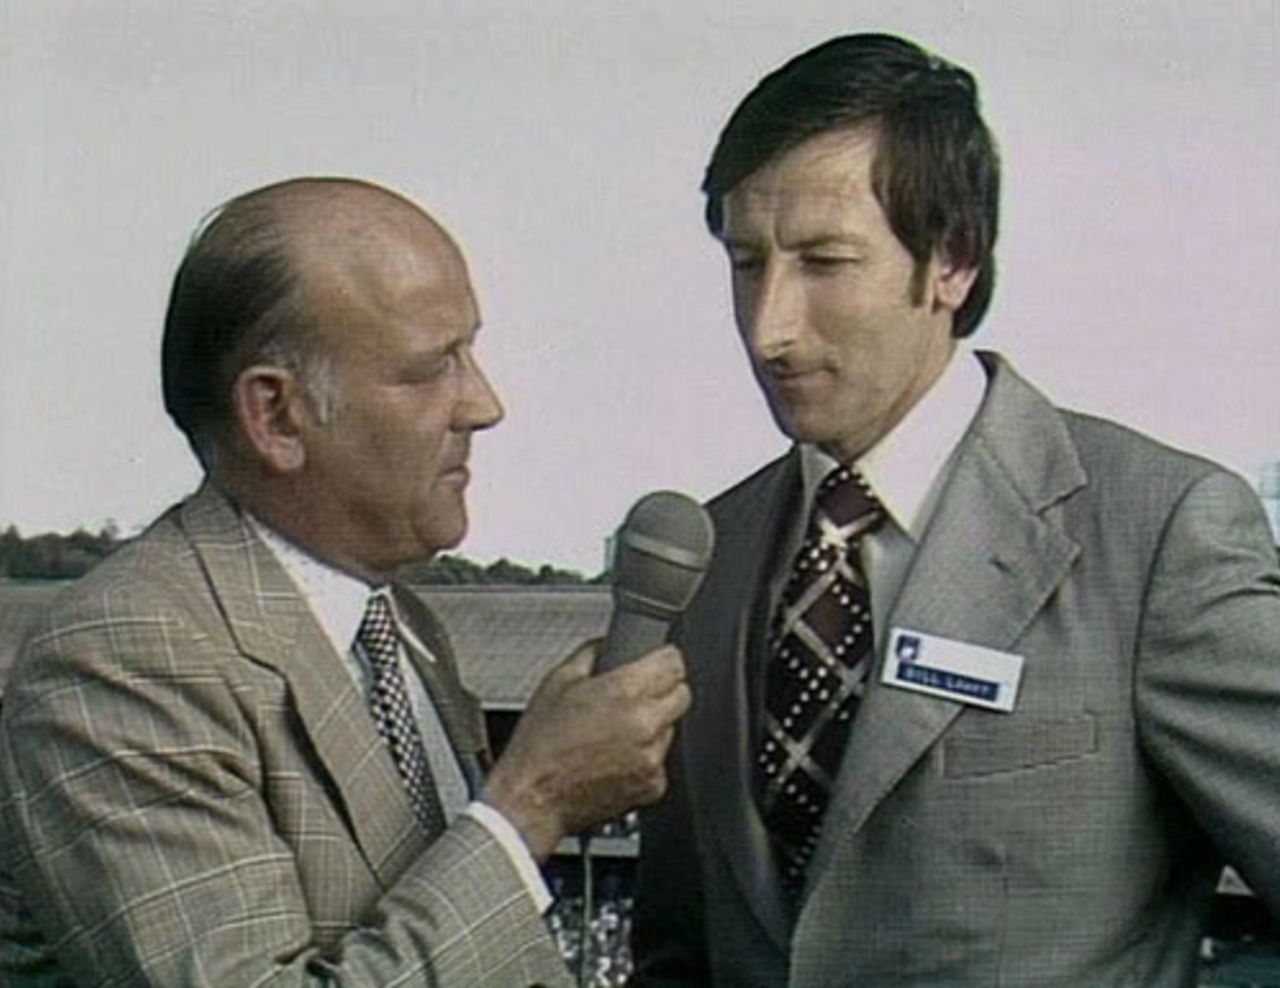 Frank Tyson interviews Bill Lawry during the 1977 Centenary Test at the MCG